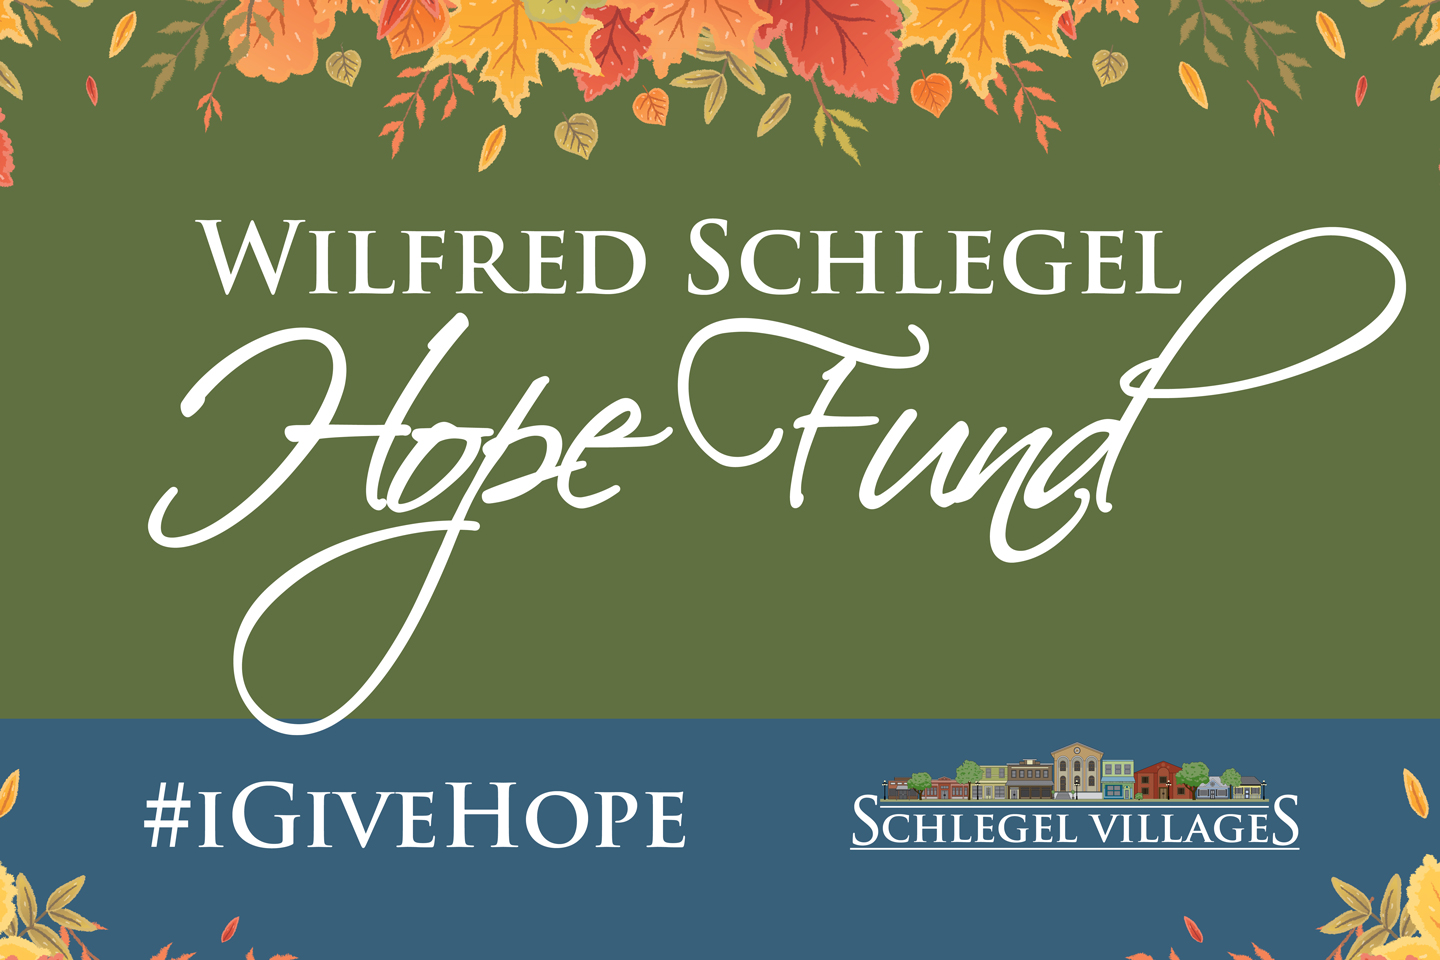 #IGiveHope is a reminder of the legacy behind the Fund; Wilfred Schlegel was a humble community builder, always there to lend a hand, and Schlegel Villages team members embody that spirit every day.